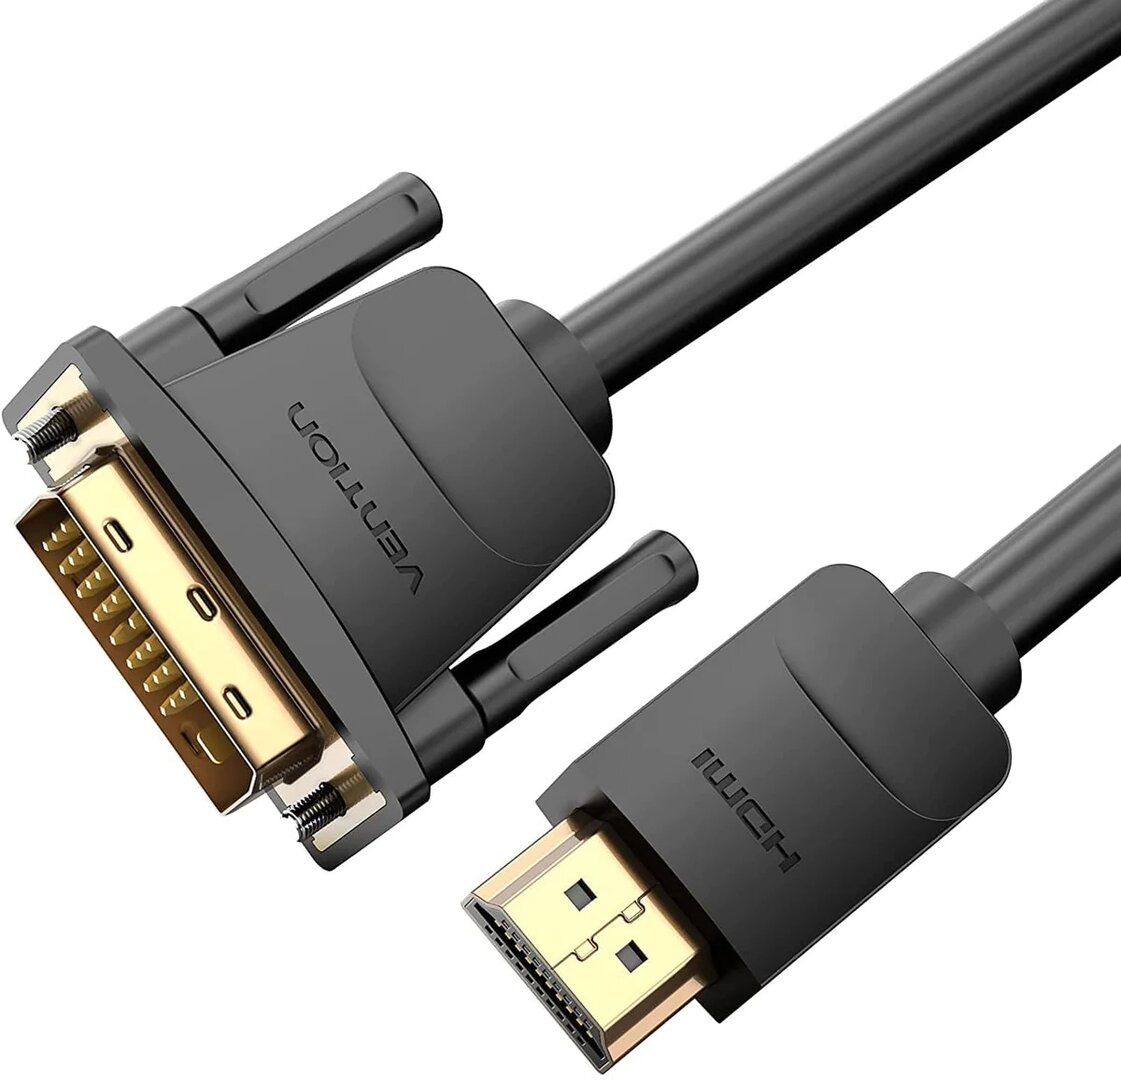 VENTION ABFBL HDMI to DVI Cable 10M Black